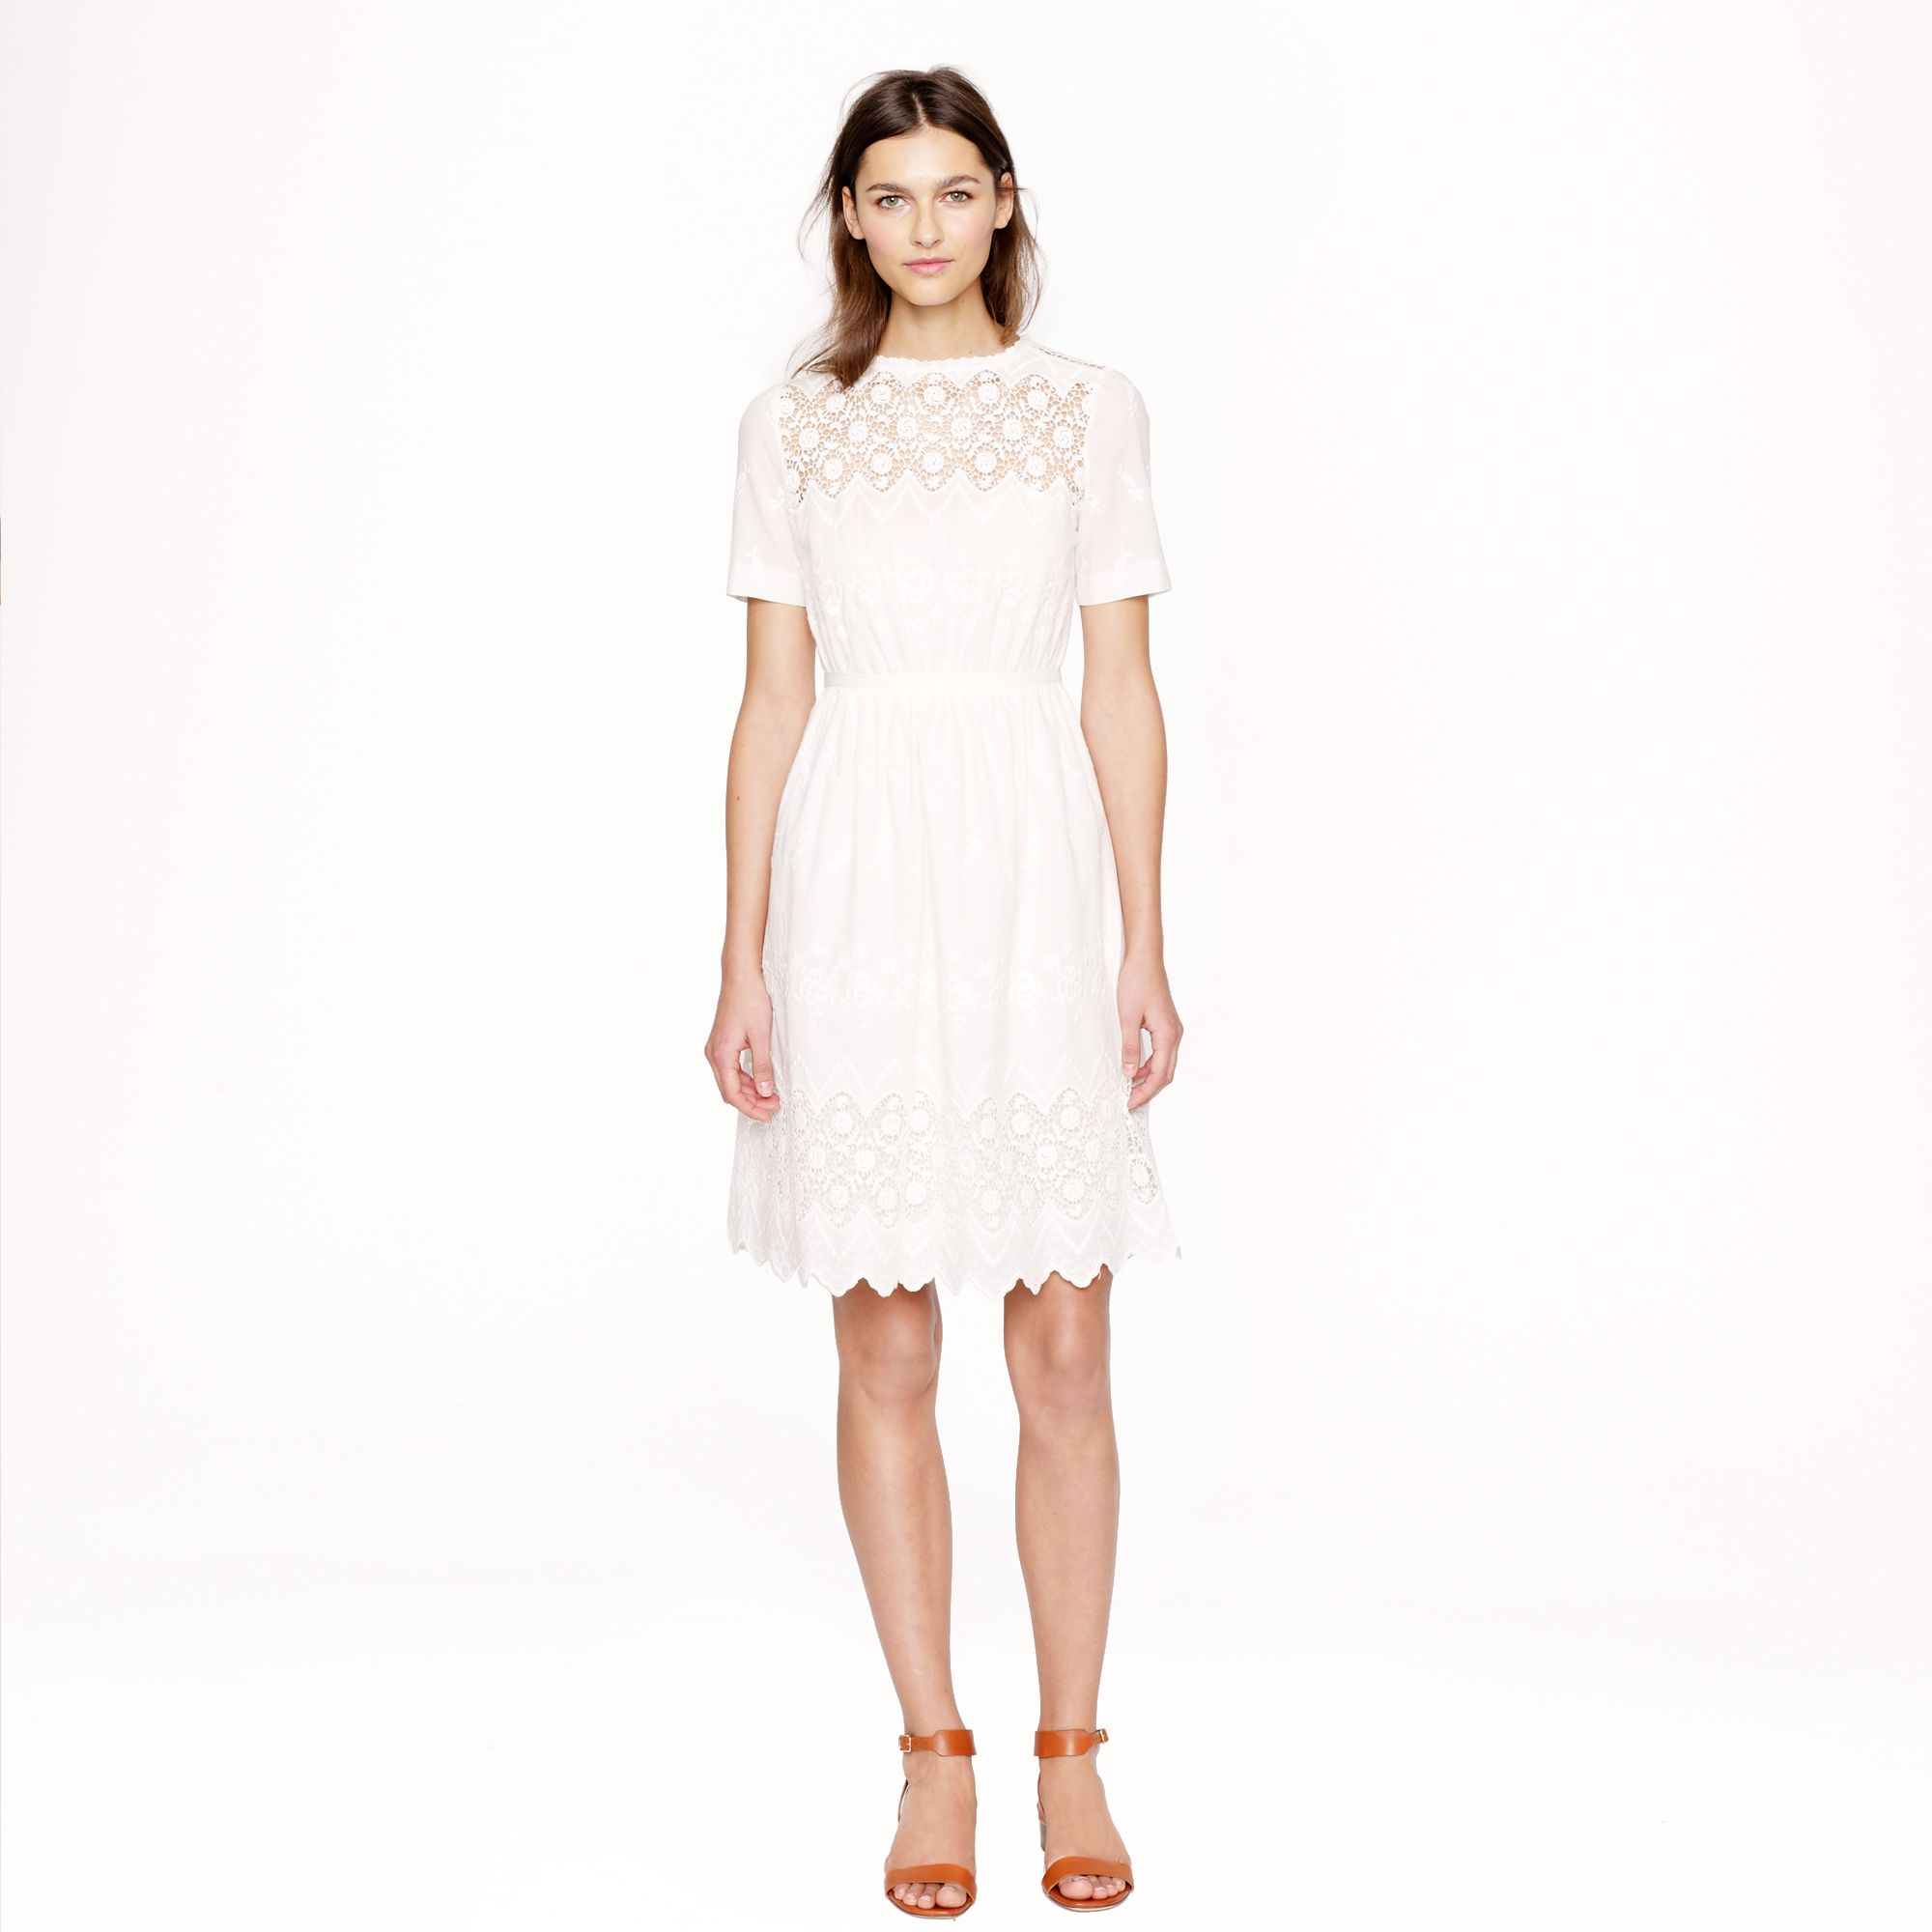 J.crew Collection Victorian Lace Dress in White | Lyst